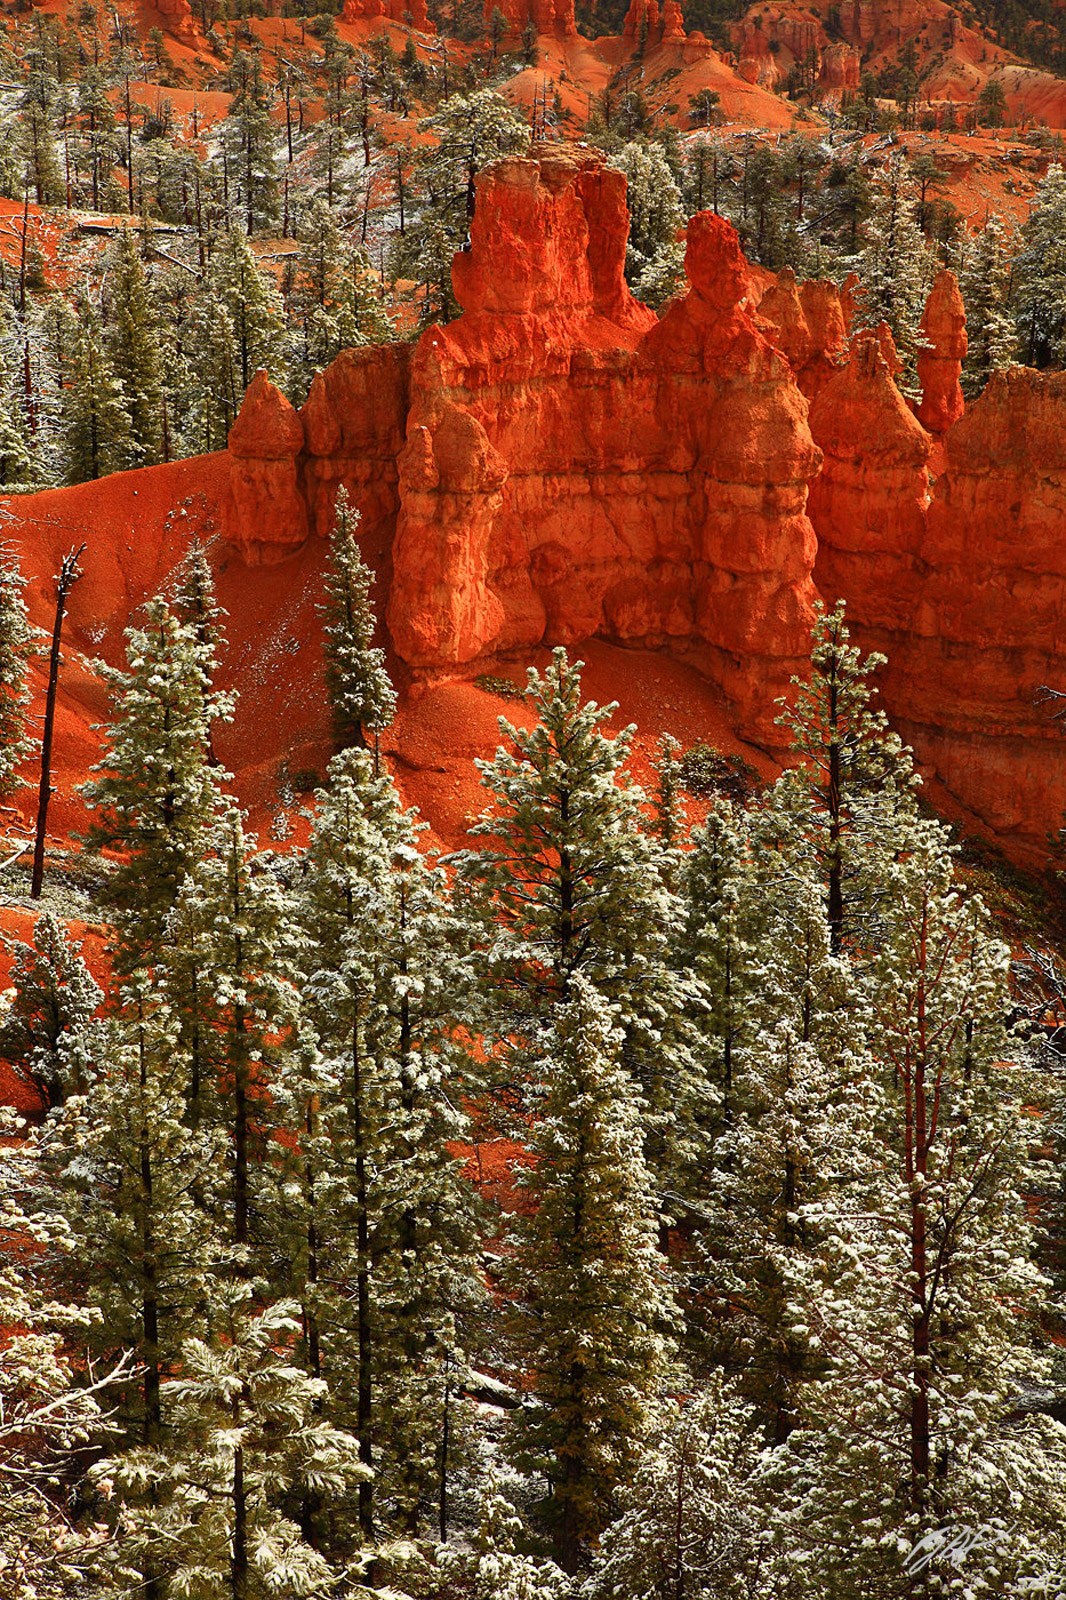 Fresh Snow on Hoodoo Rock Formations in Bryce Canyon National Park in Utah